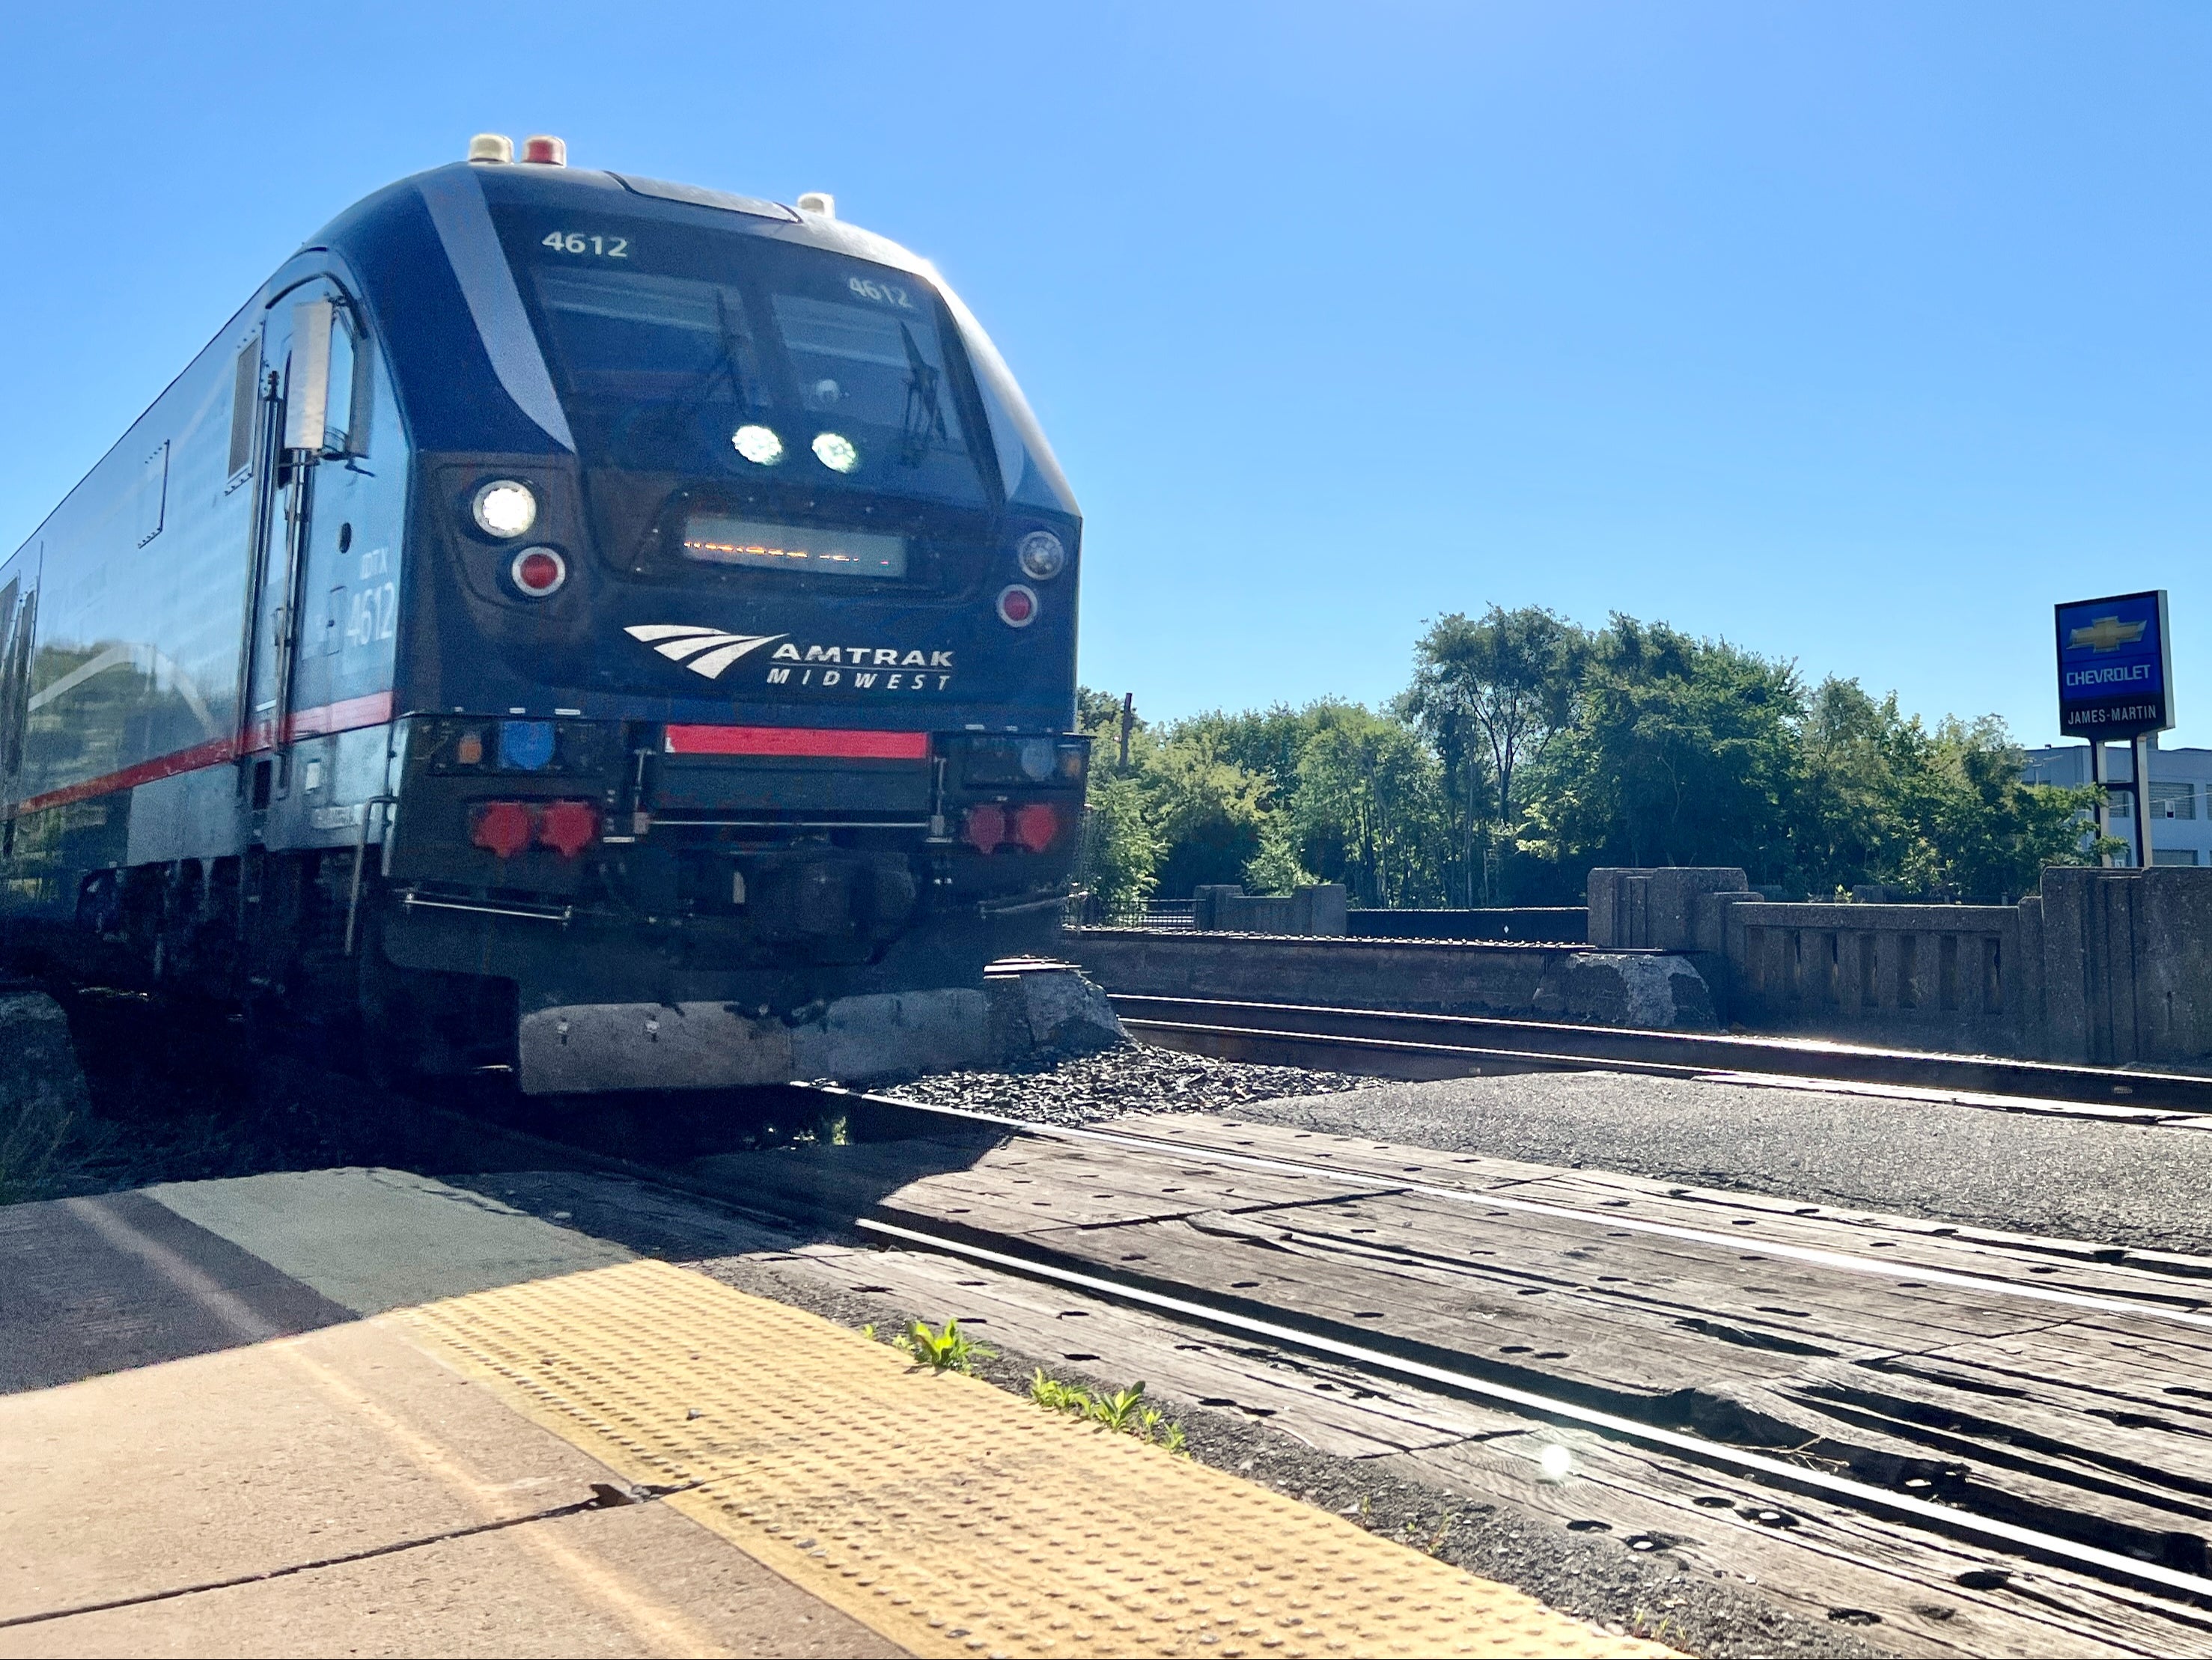 Dismal express: an Amtrak train for Chicago at Detroit station, miles from downtown